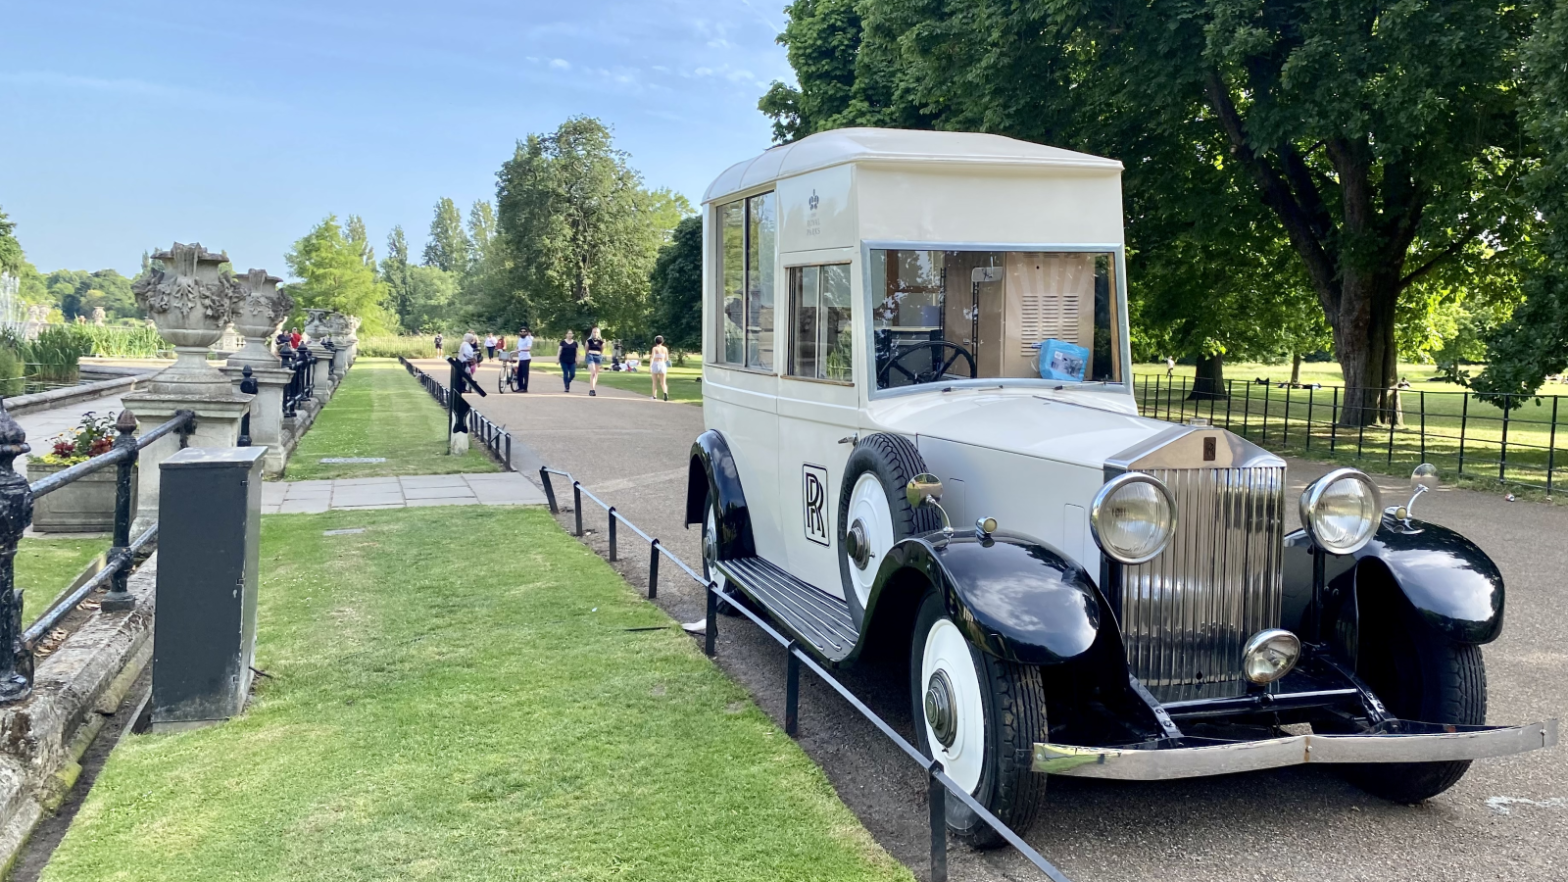 Please Look at This Incredible Rolls-Royce Ice Cream Truck